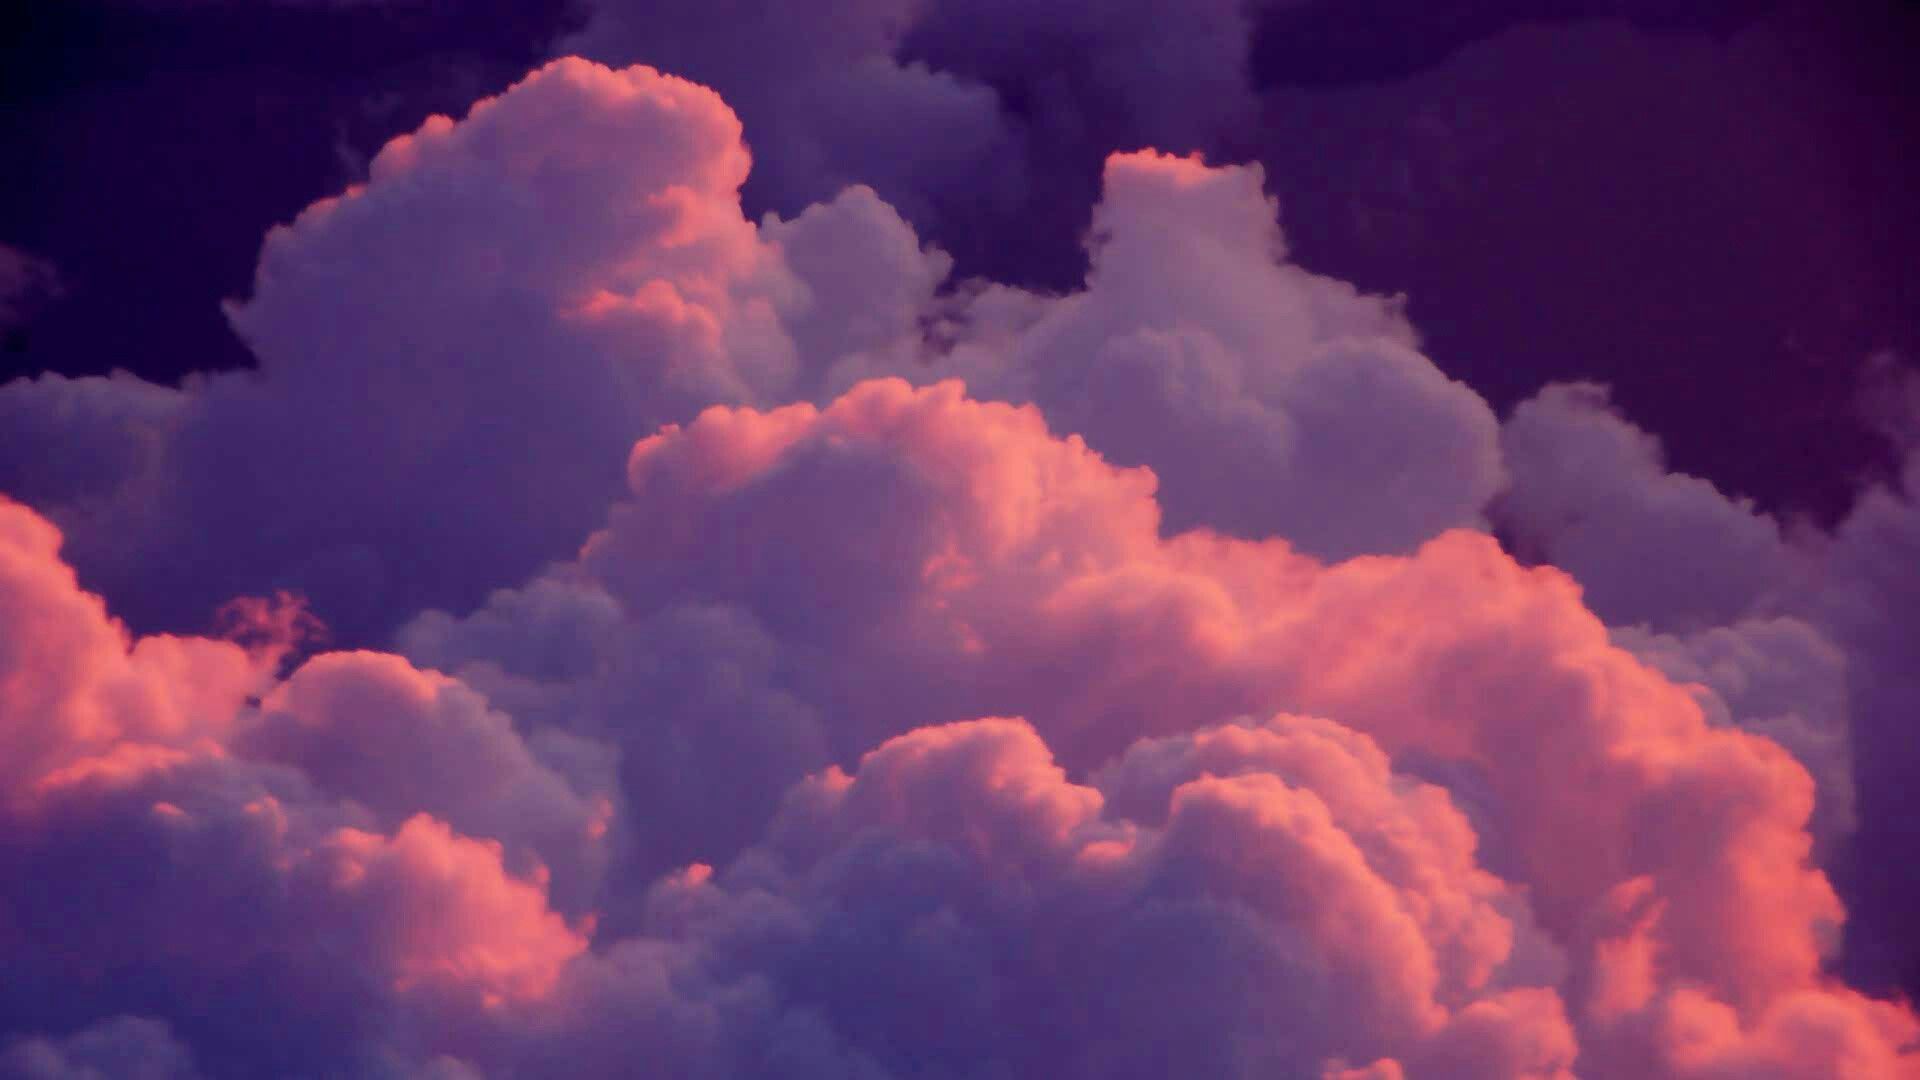 25 Top pink aesthetic wallpaper laptop clouds You Can Download It For ...